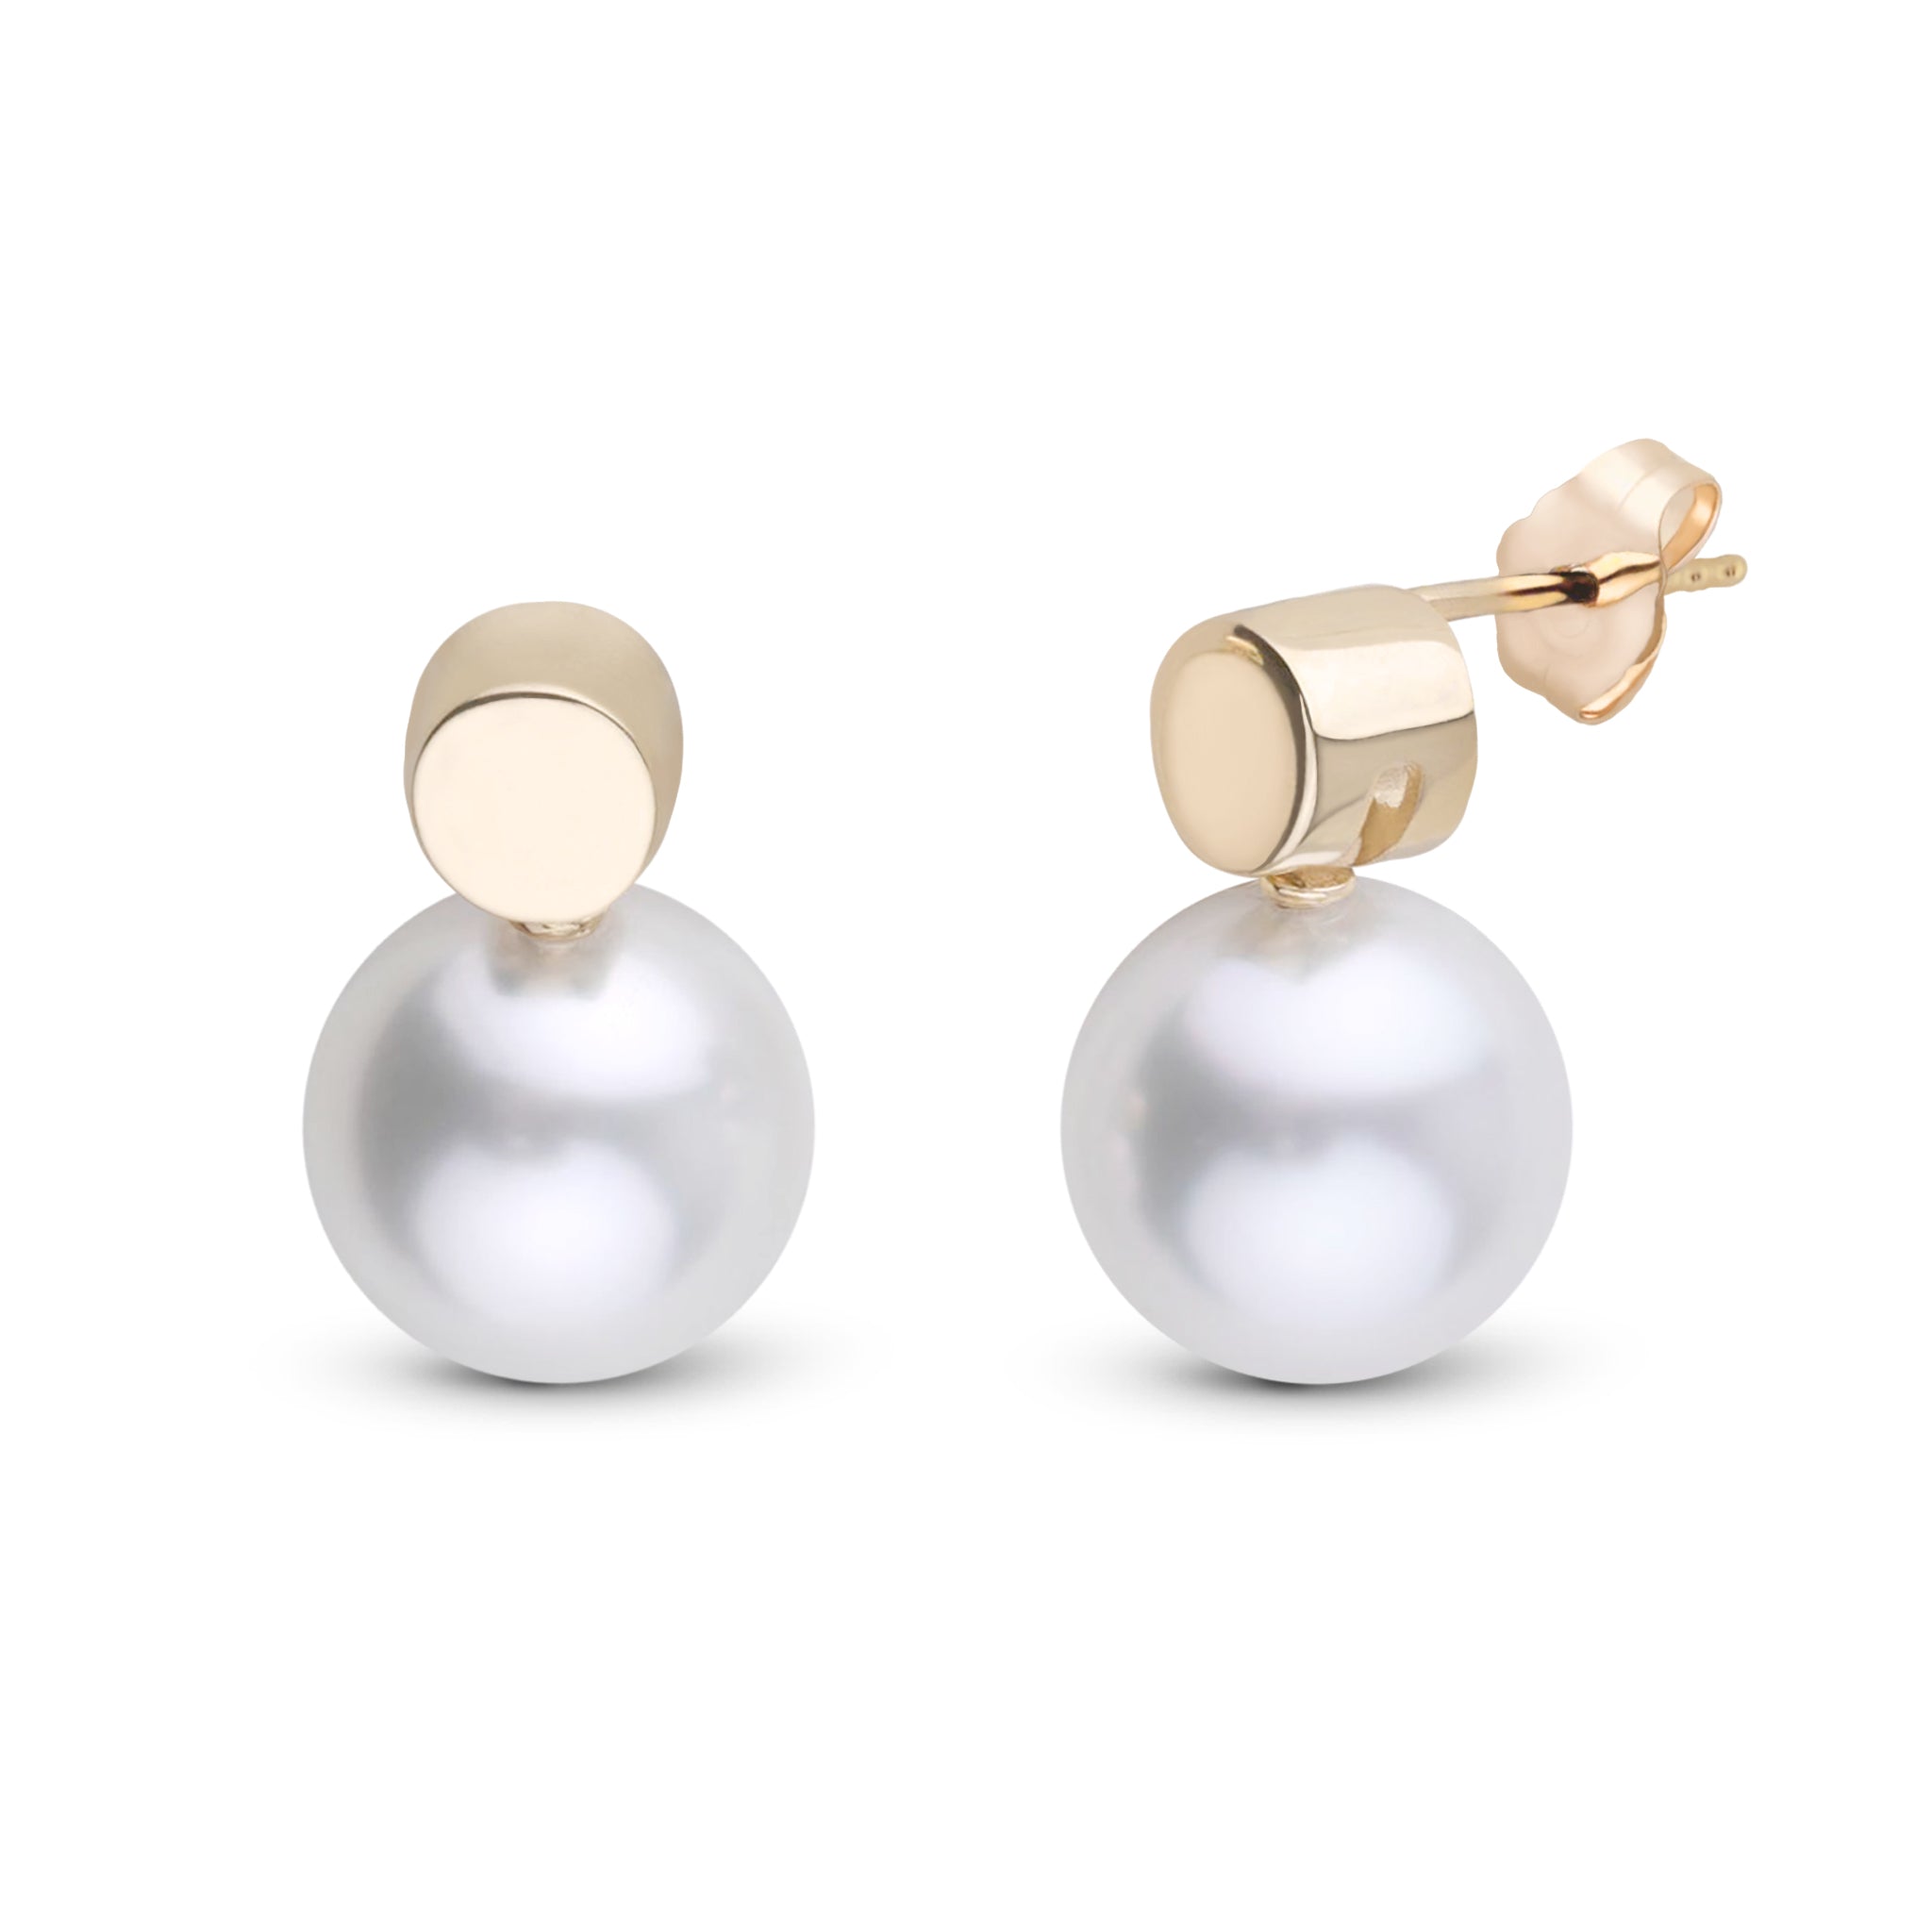 Dot Collection 10.0-11.0 mm White South Sea Pearl Earrings Yellow Gold